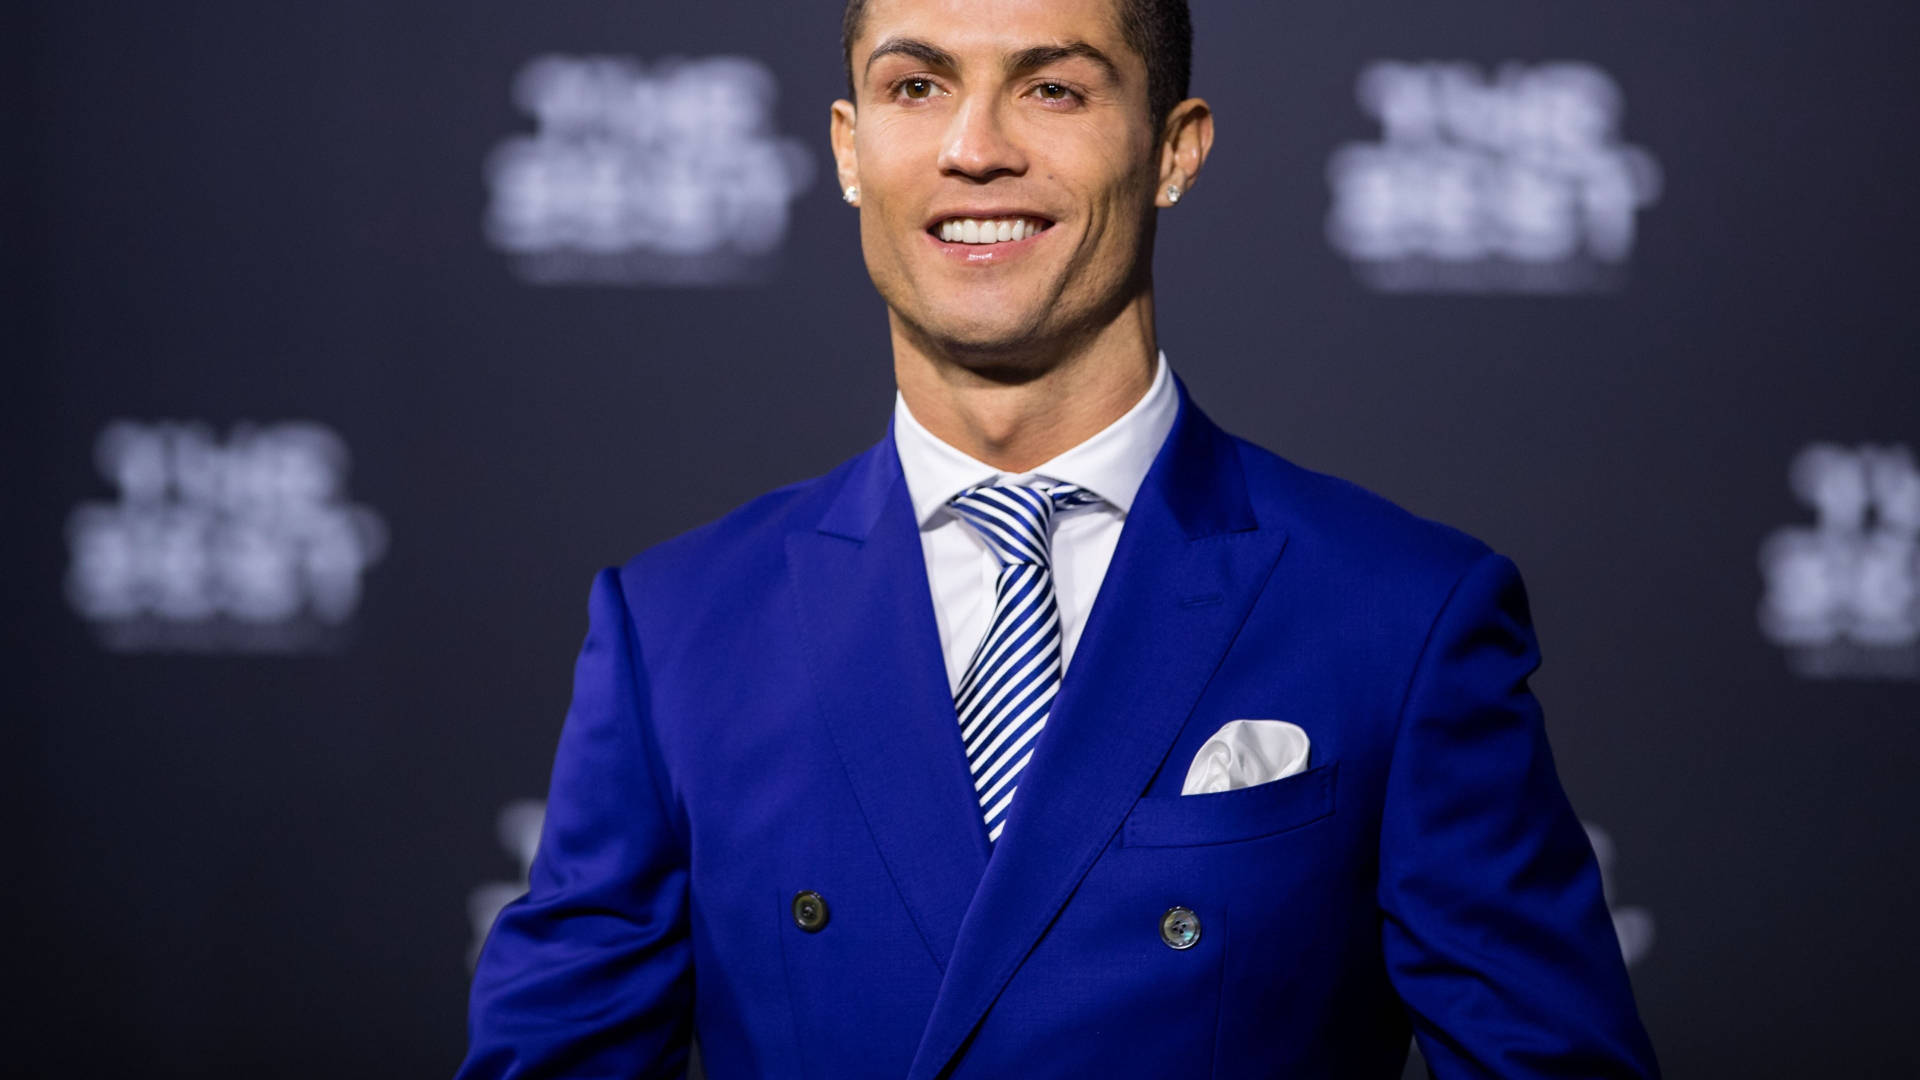 Cr7 Hd In Blue Suit Background